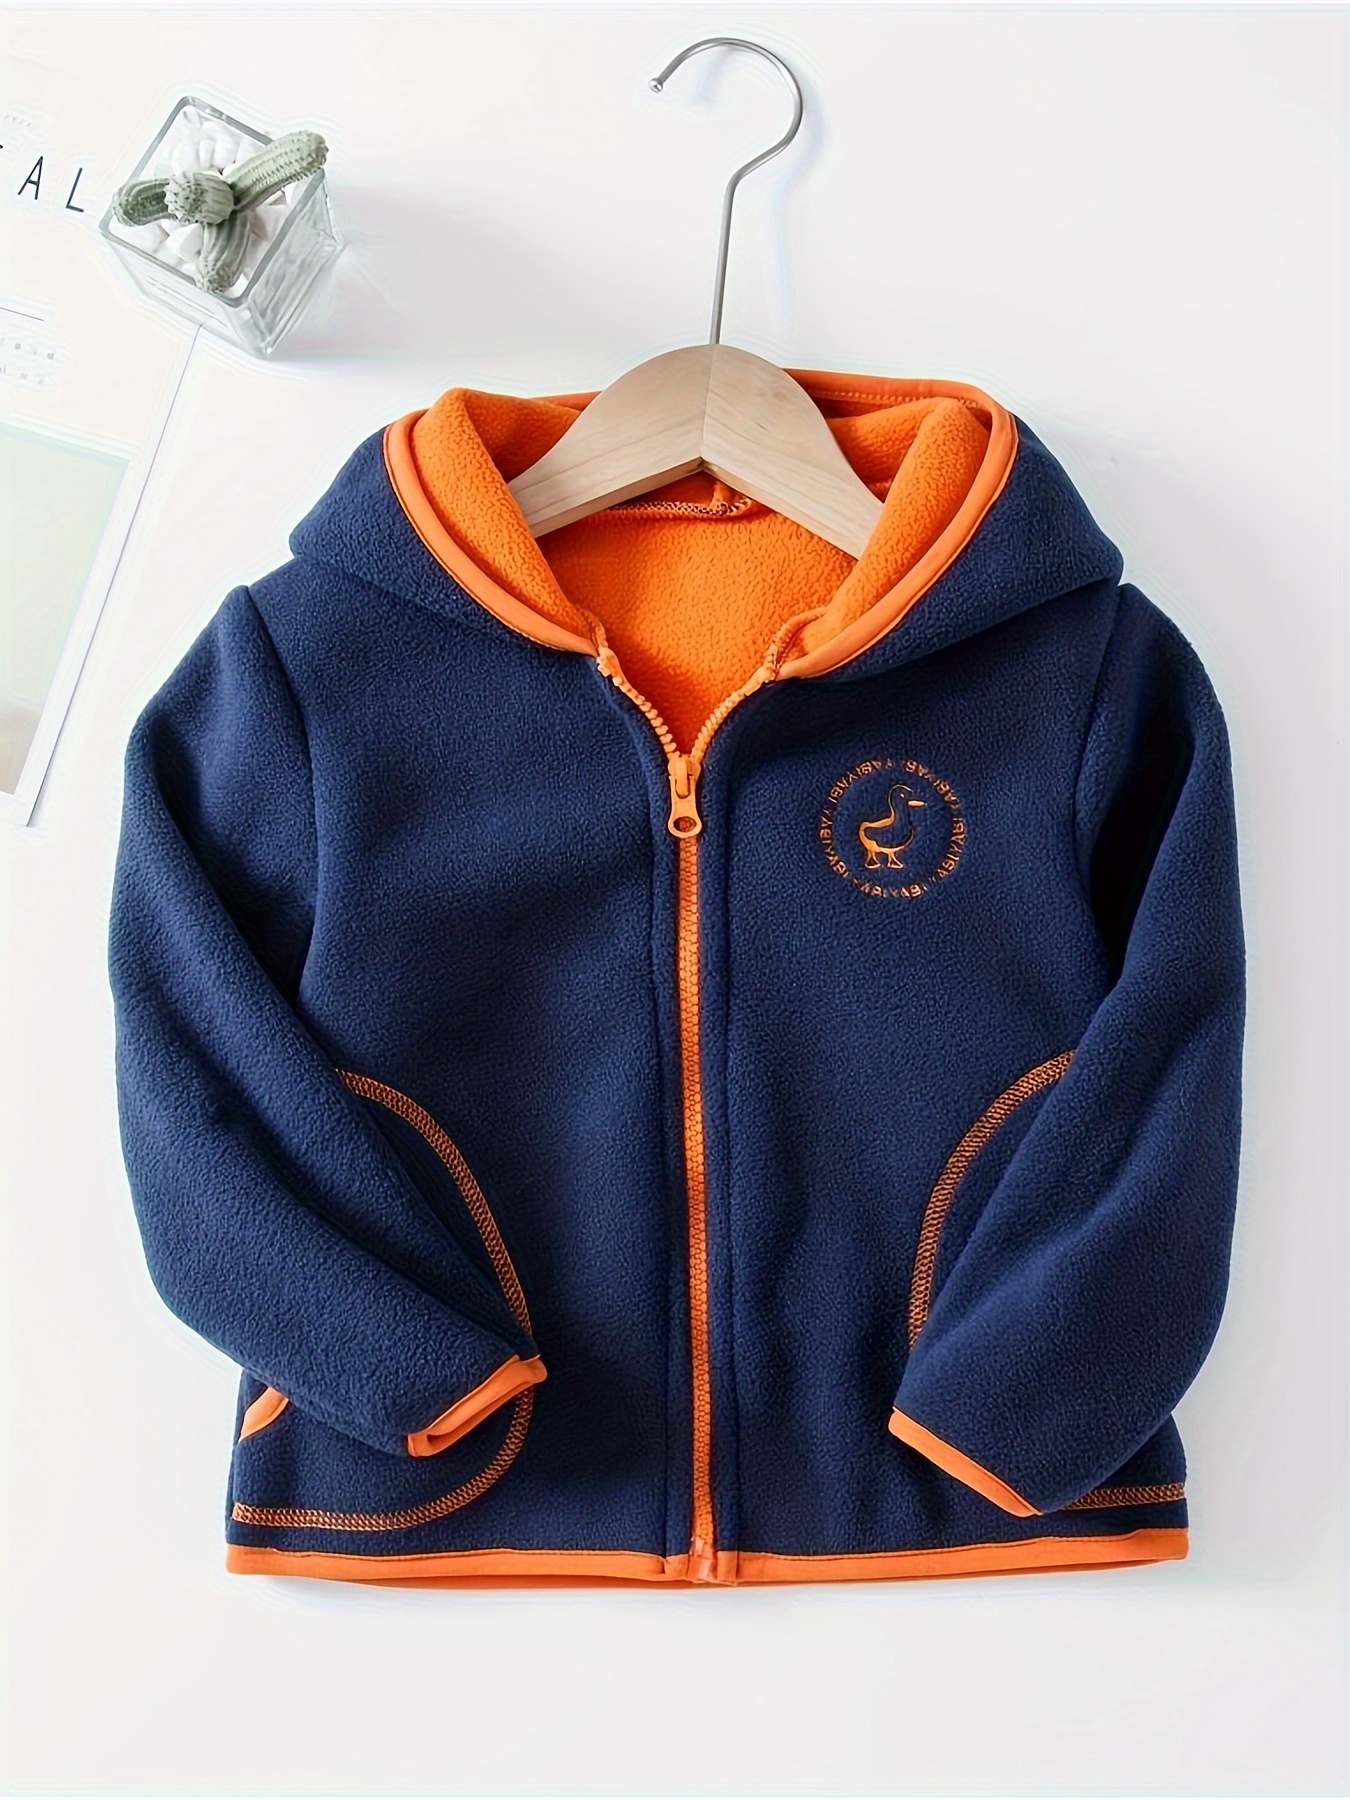 Kid's Color Clash Polar Fleece Jacket, Duck Embroidered Hooded Coat, Boy's  Clothes For Spring Fall Outdoor